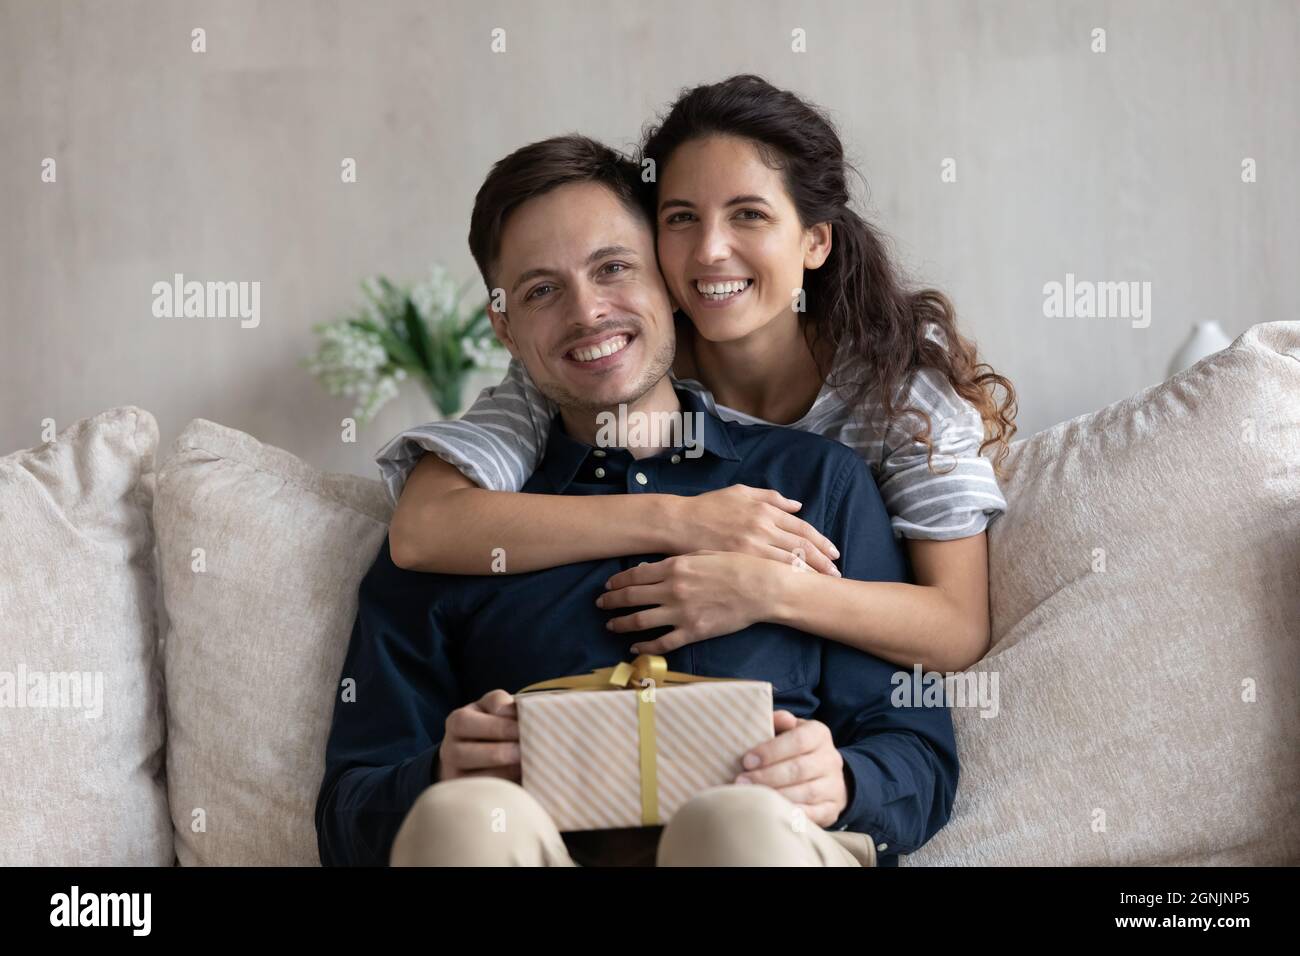 Portrait of affectionate young couple with wrapped present. Stock Photo